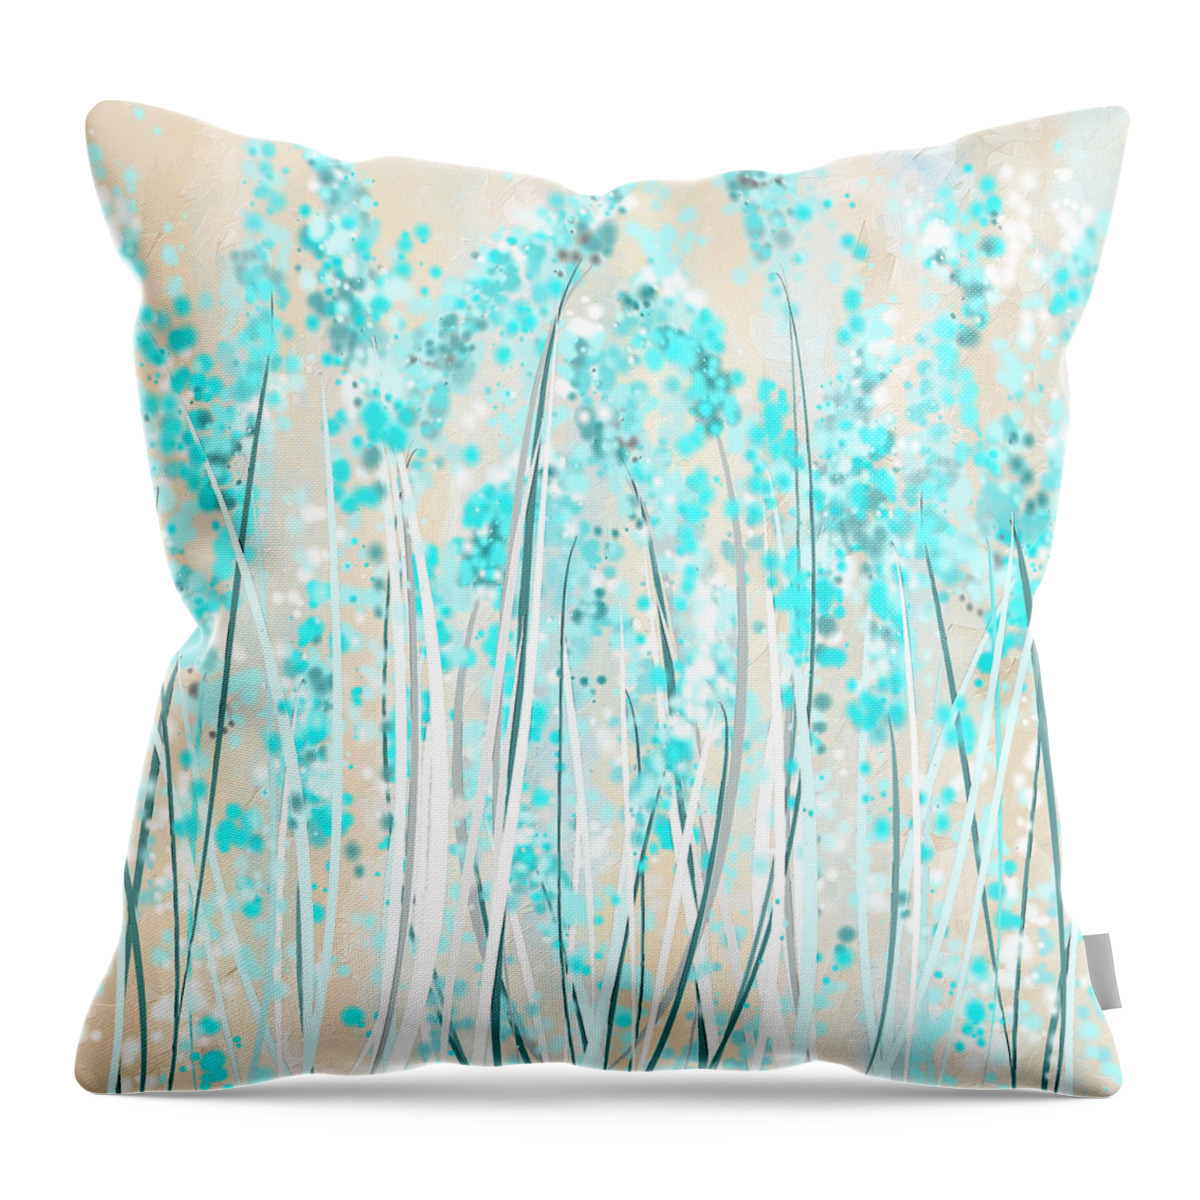 Blue Throw Pillow featuring the painting Garden Of Blues- Teal And Cream Art by Lourry Legarde